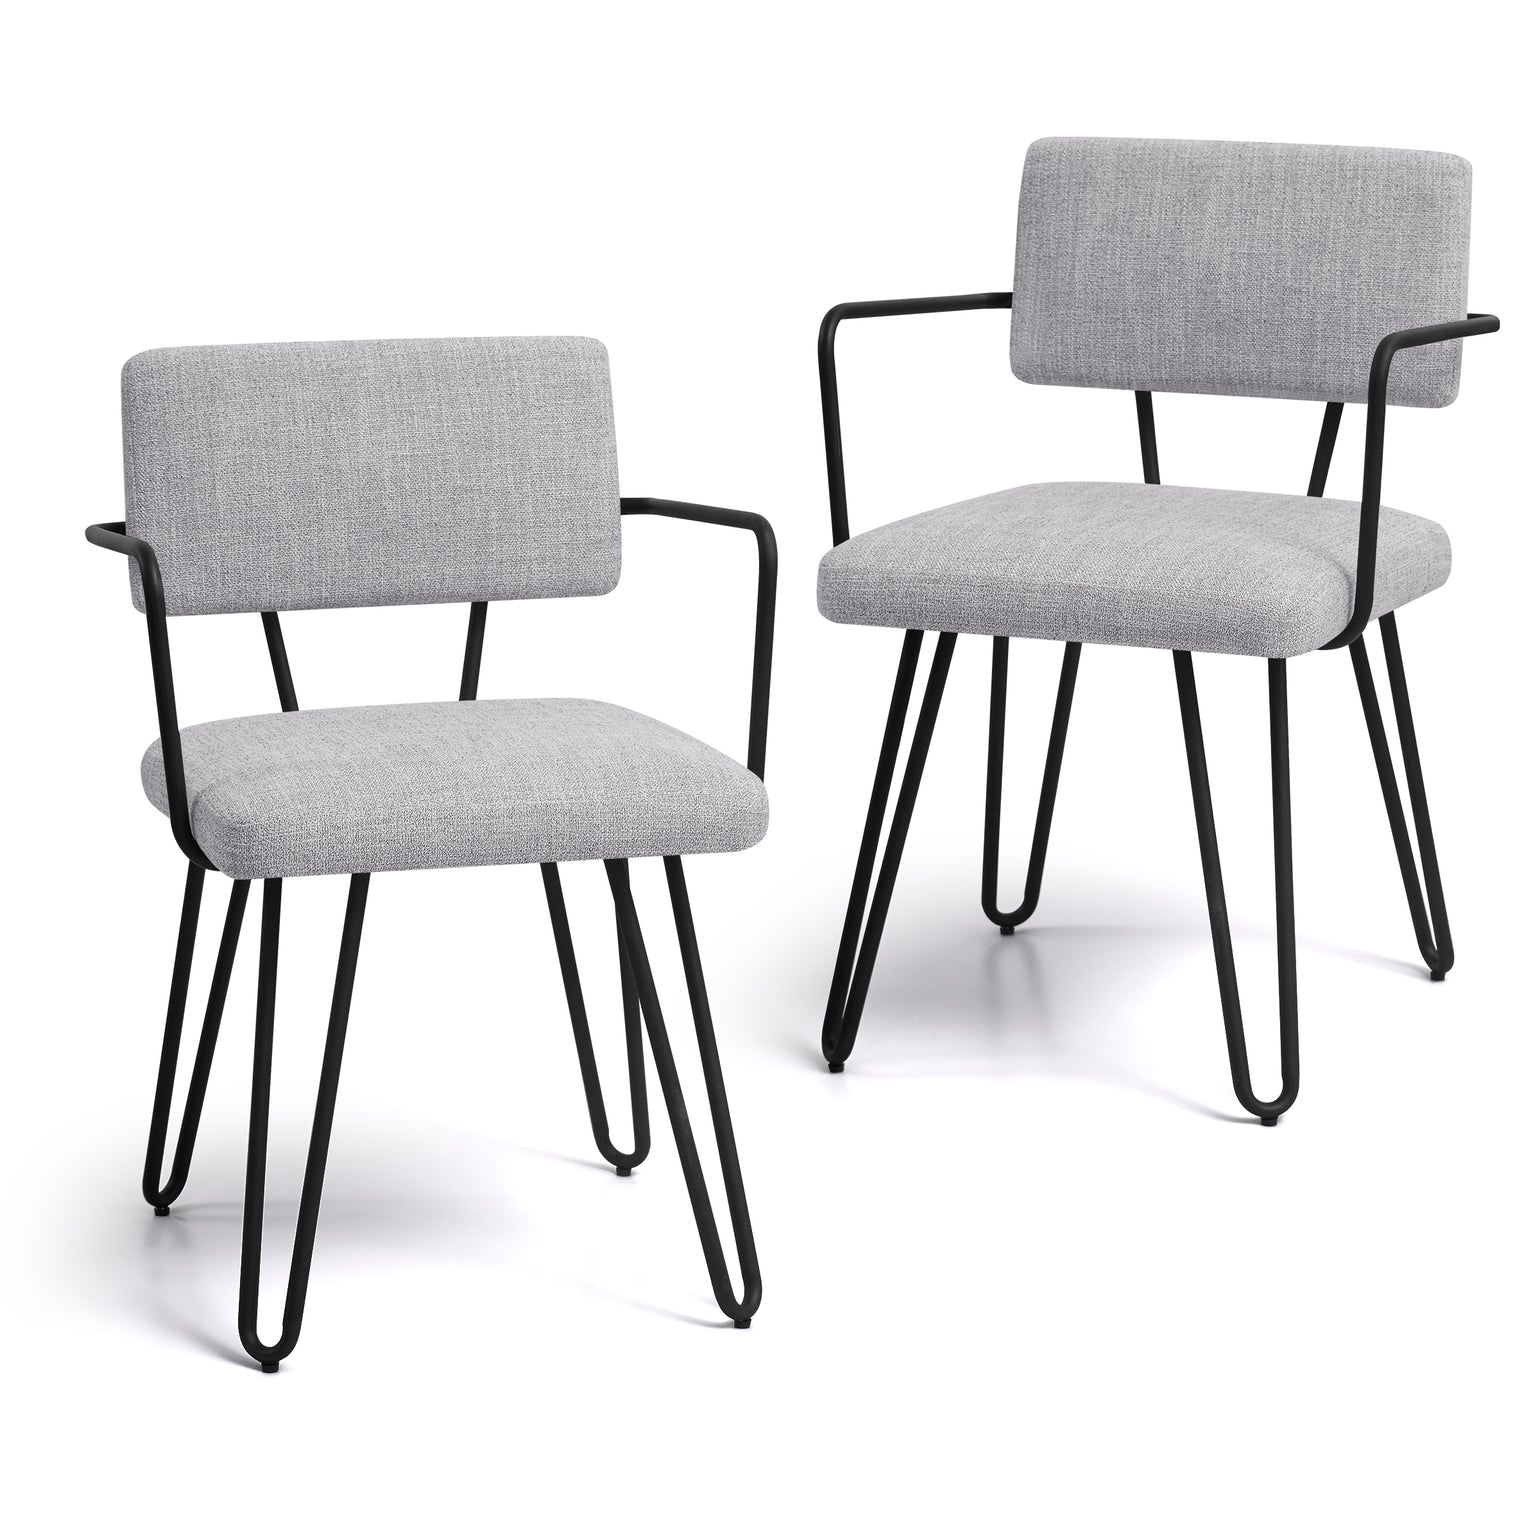 Sofid Fabric Metal Upholstered Back Arm Chair (Set of 2)